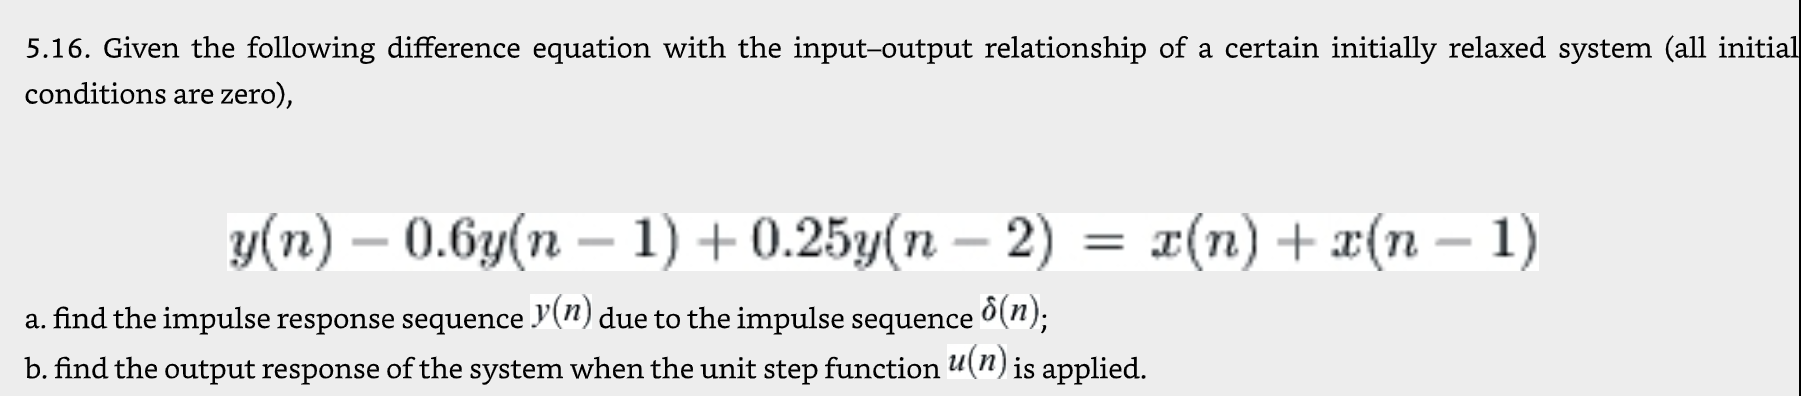 5.16. Given the following difference equation with the input-output relationship of a certain initially relaxed system (all i